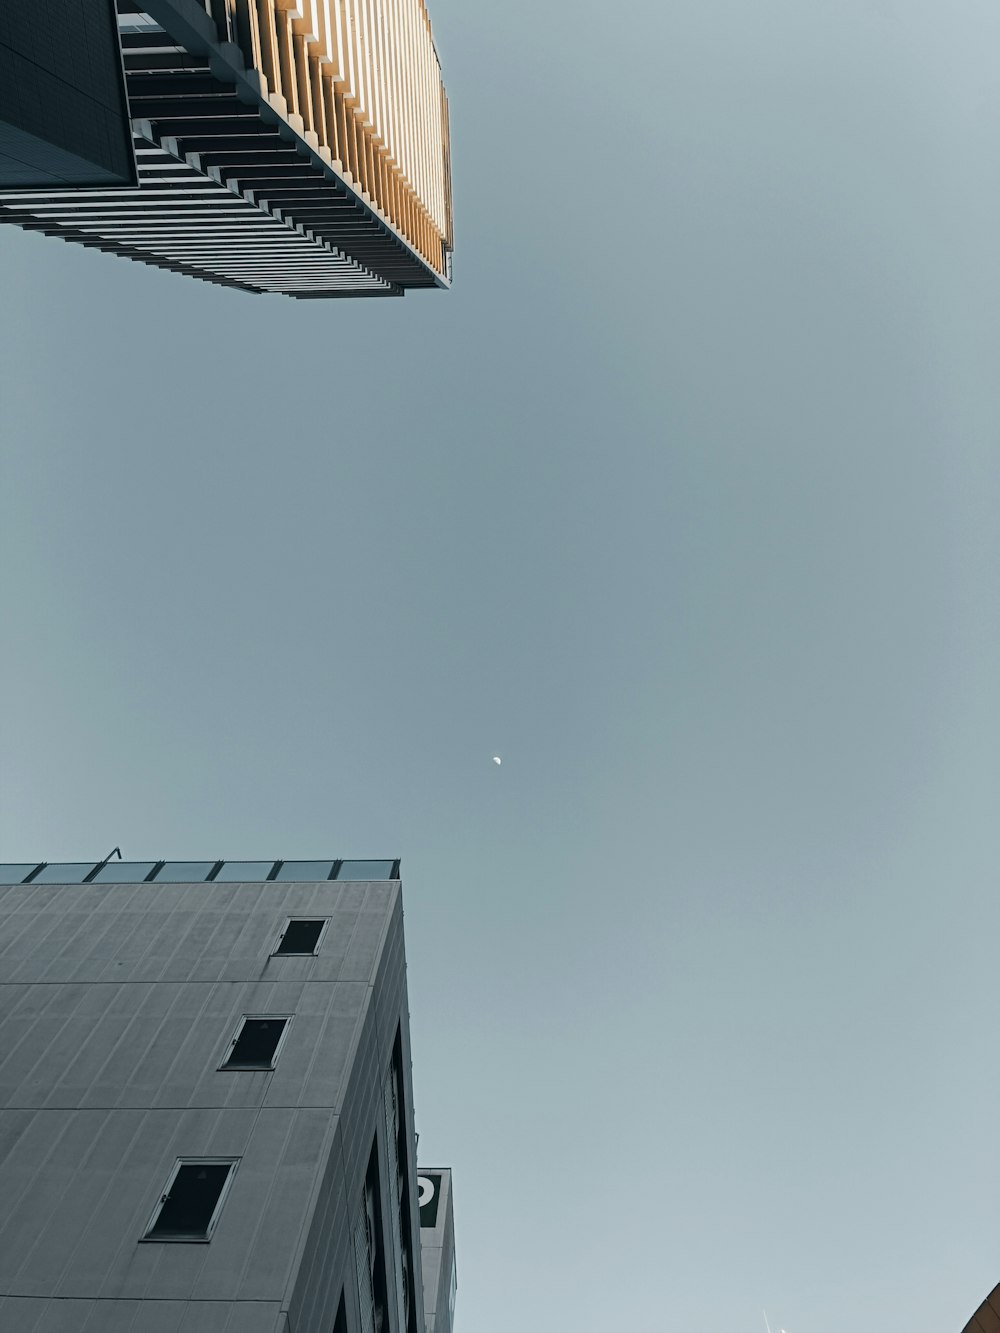 a tall building next to a very tall building